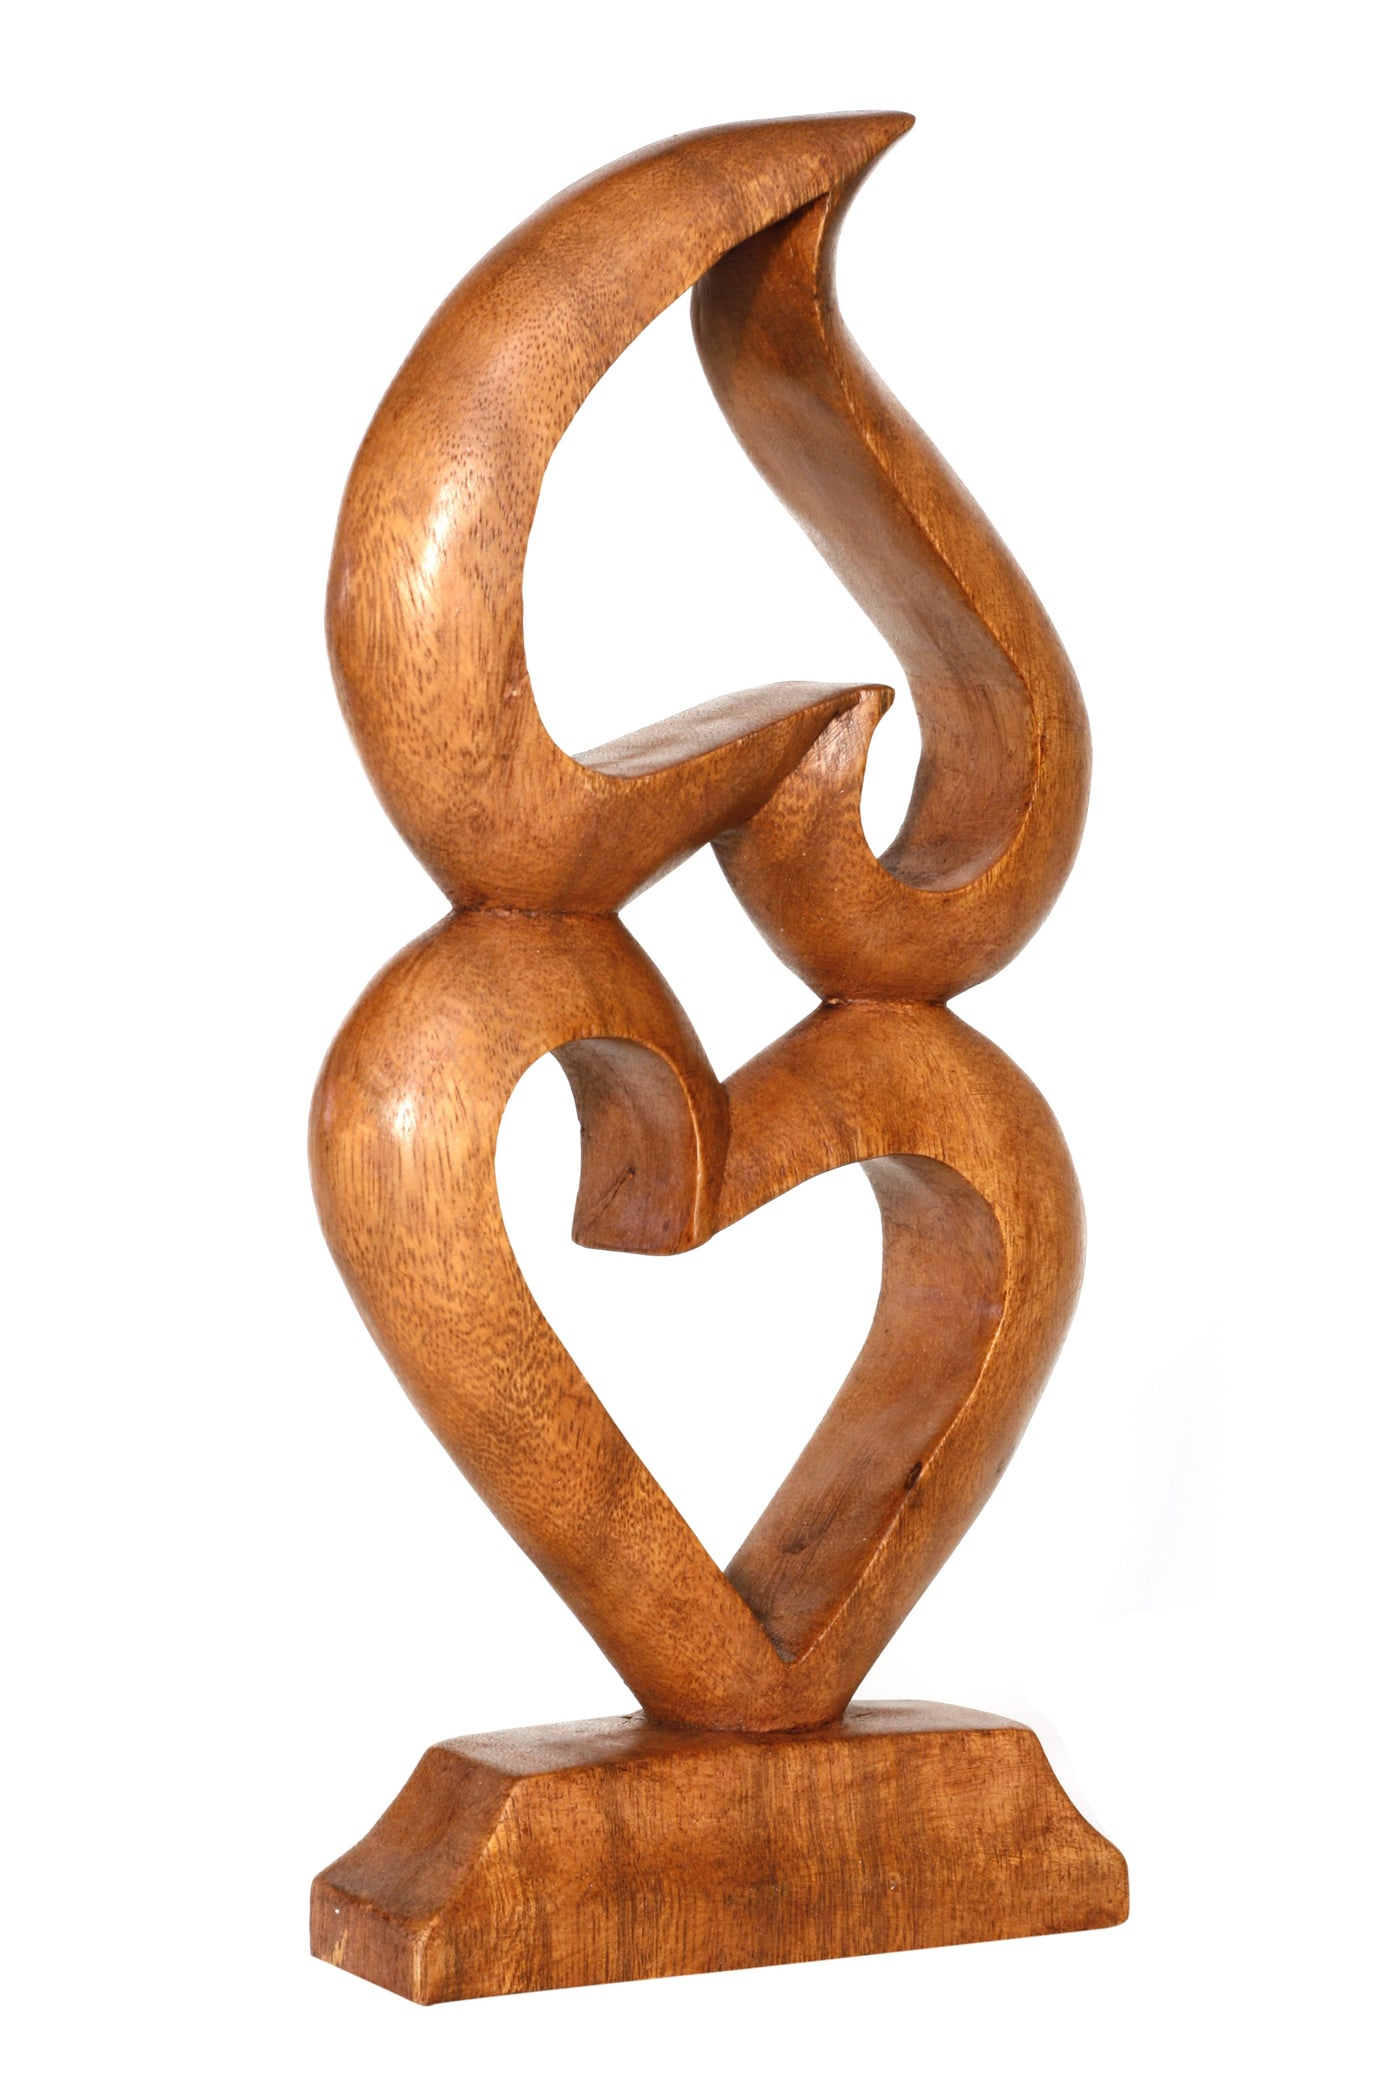 12" Wooden Handmade Abstract Sculpture Statue Handcrafted "Two Hearts, One Love" Gift Art Home Decor Figurine Accent Decoration Artwork Hand Carved